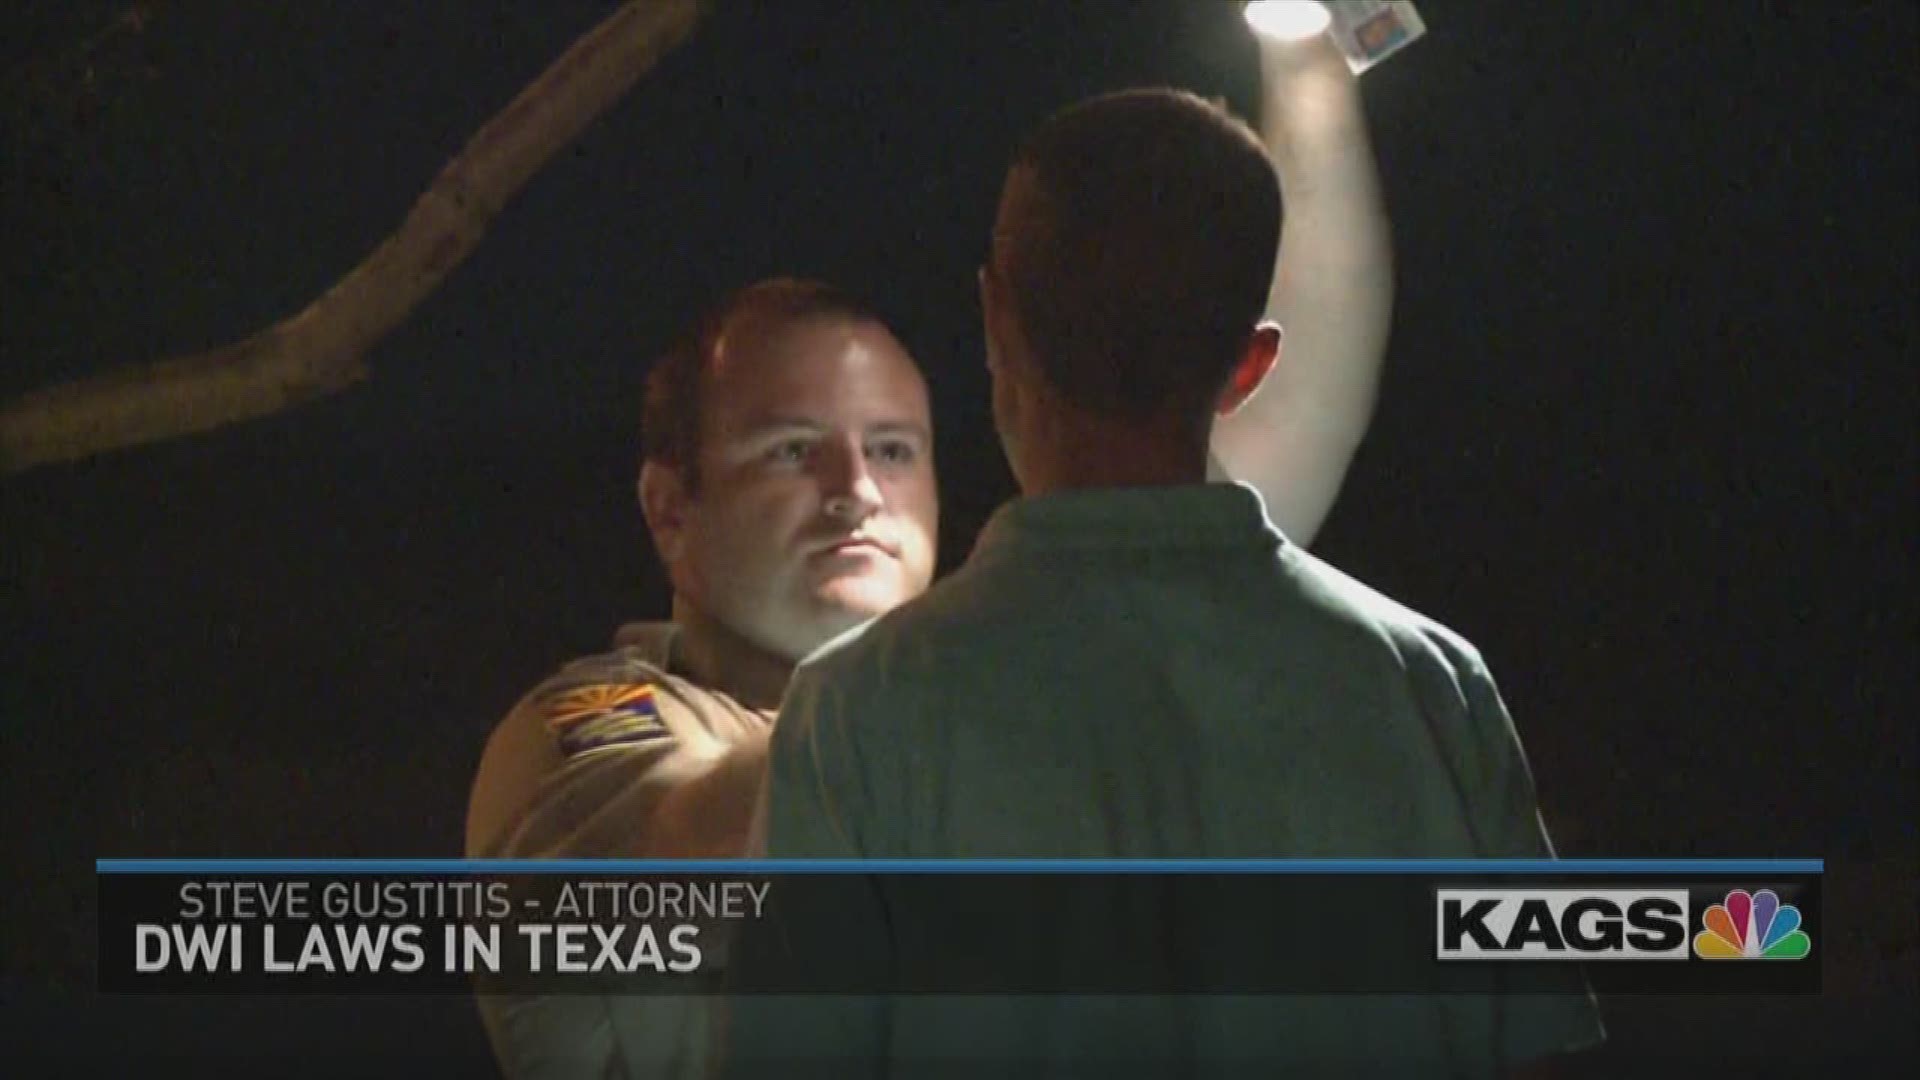 Texas law in the case of multiple DWI's.